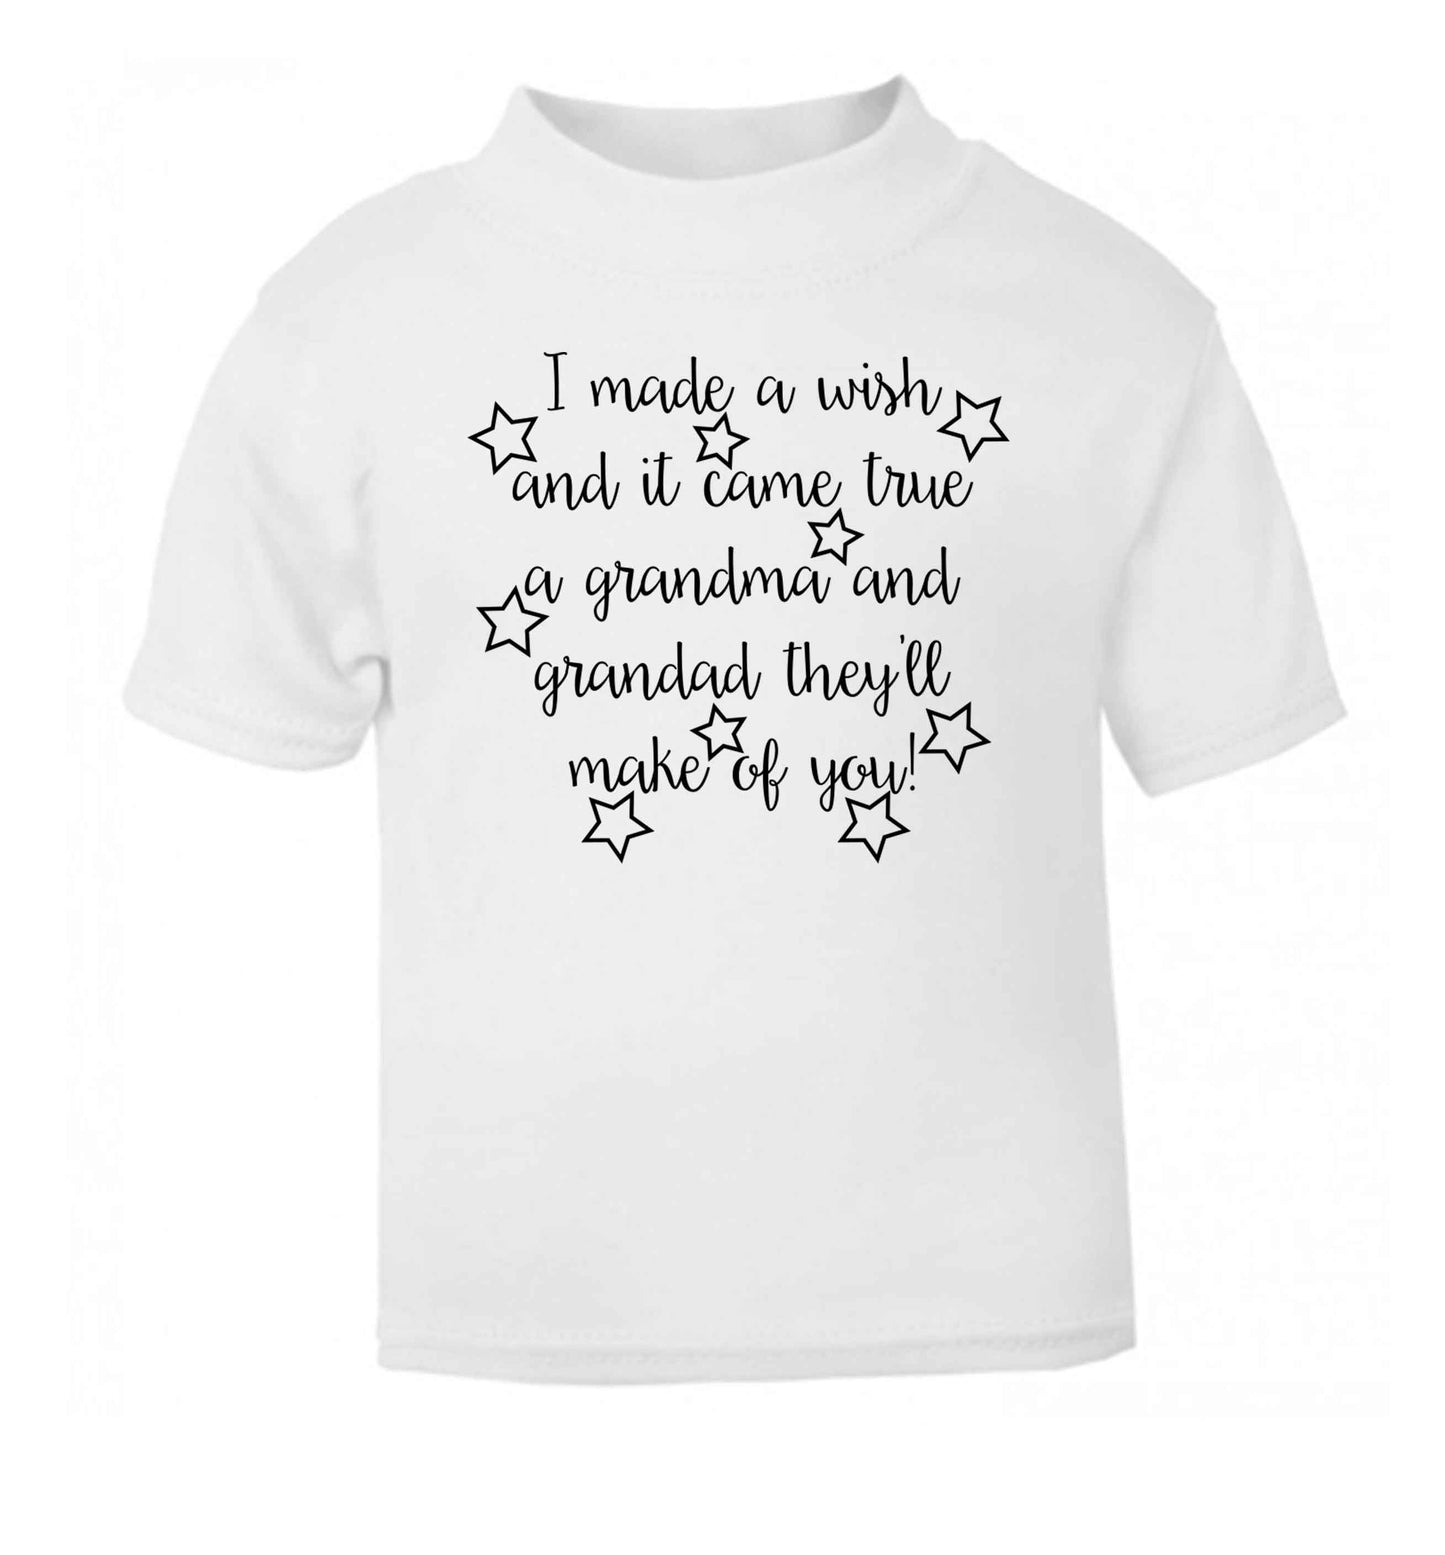 I made a wish and it came true a grandma and grandad they'll make of you! white Baby Toddler Tshirt 2 Years